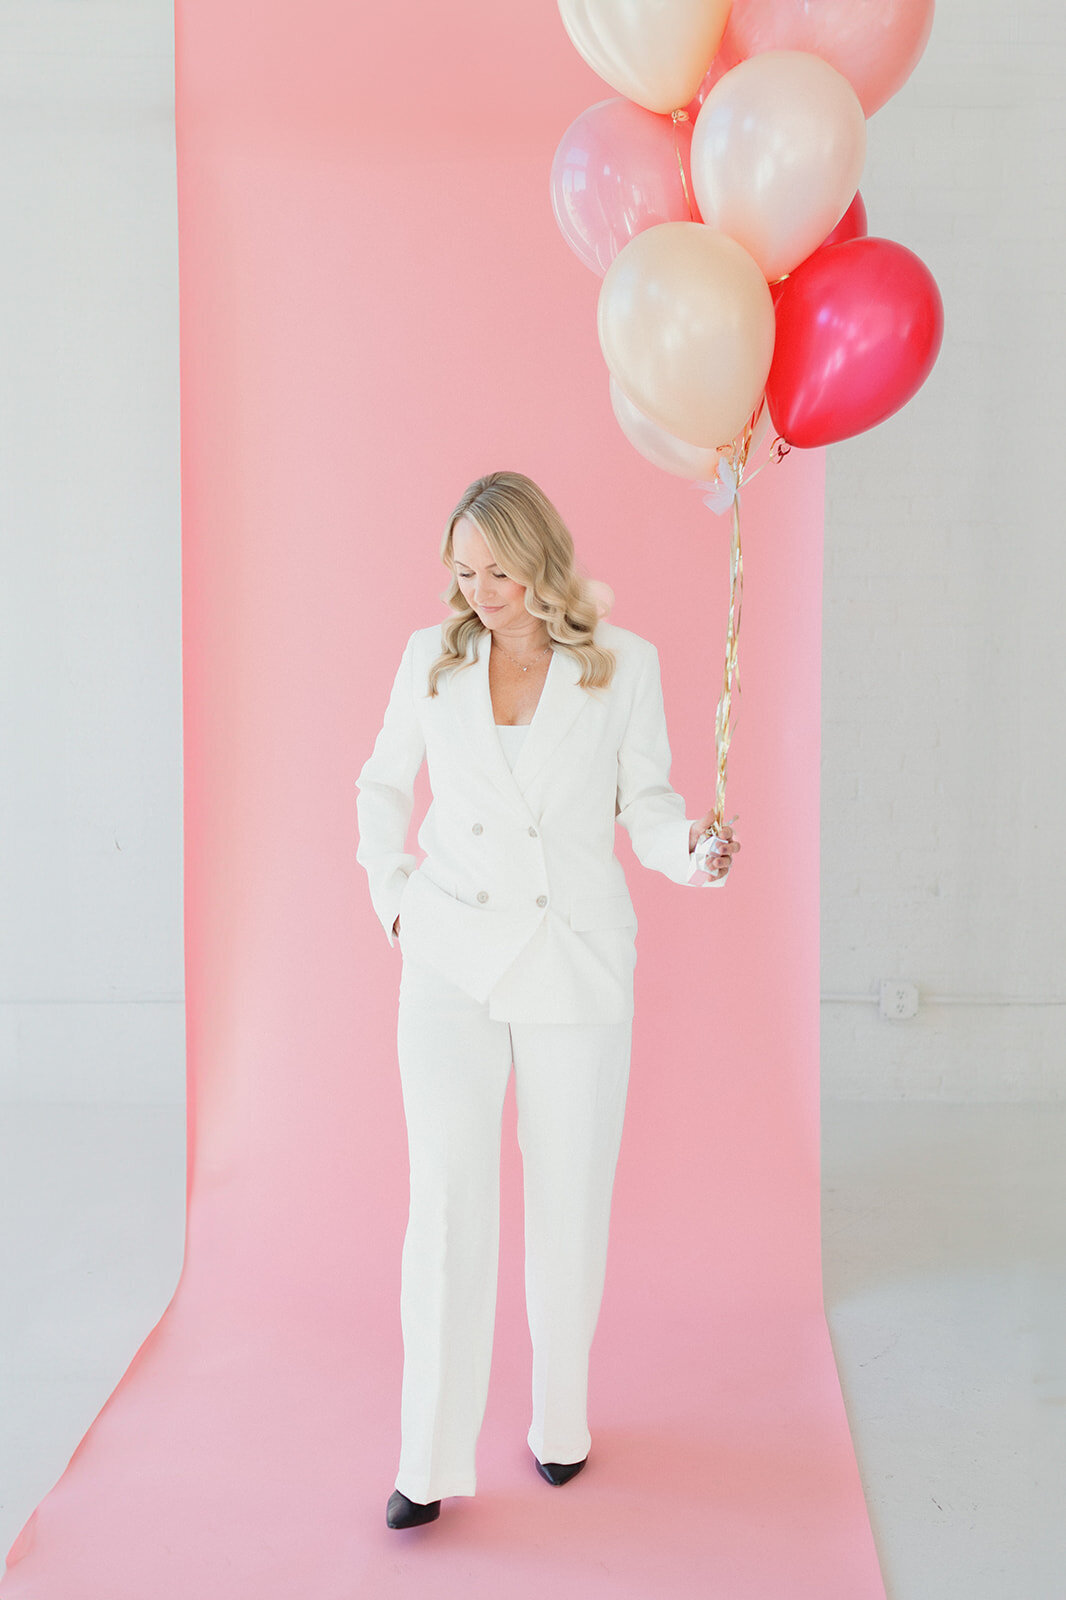 blonde woman wearing white suit is walking in front of pink backdrop and carrying large pink and white balloons. She is looking down toward the ground.